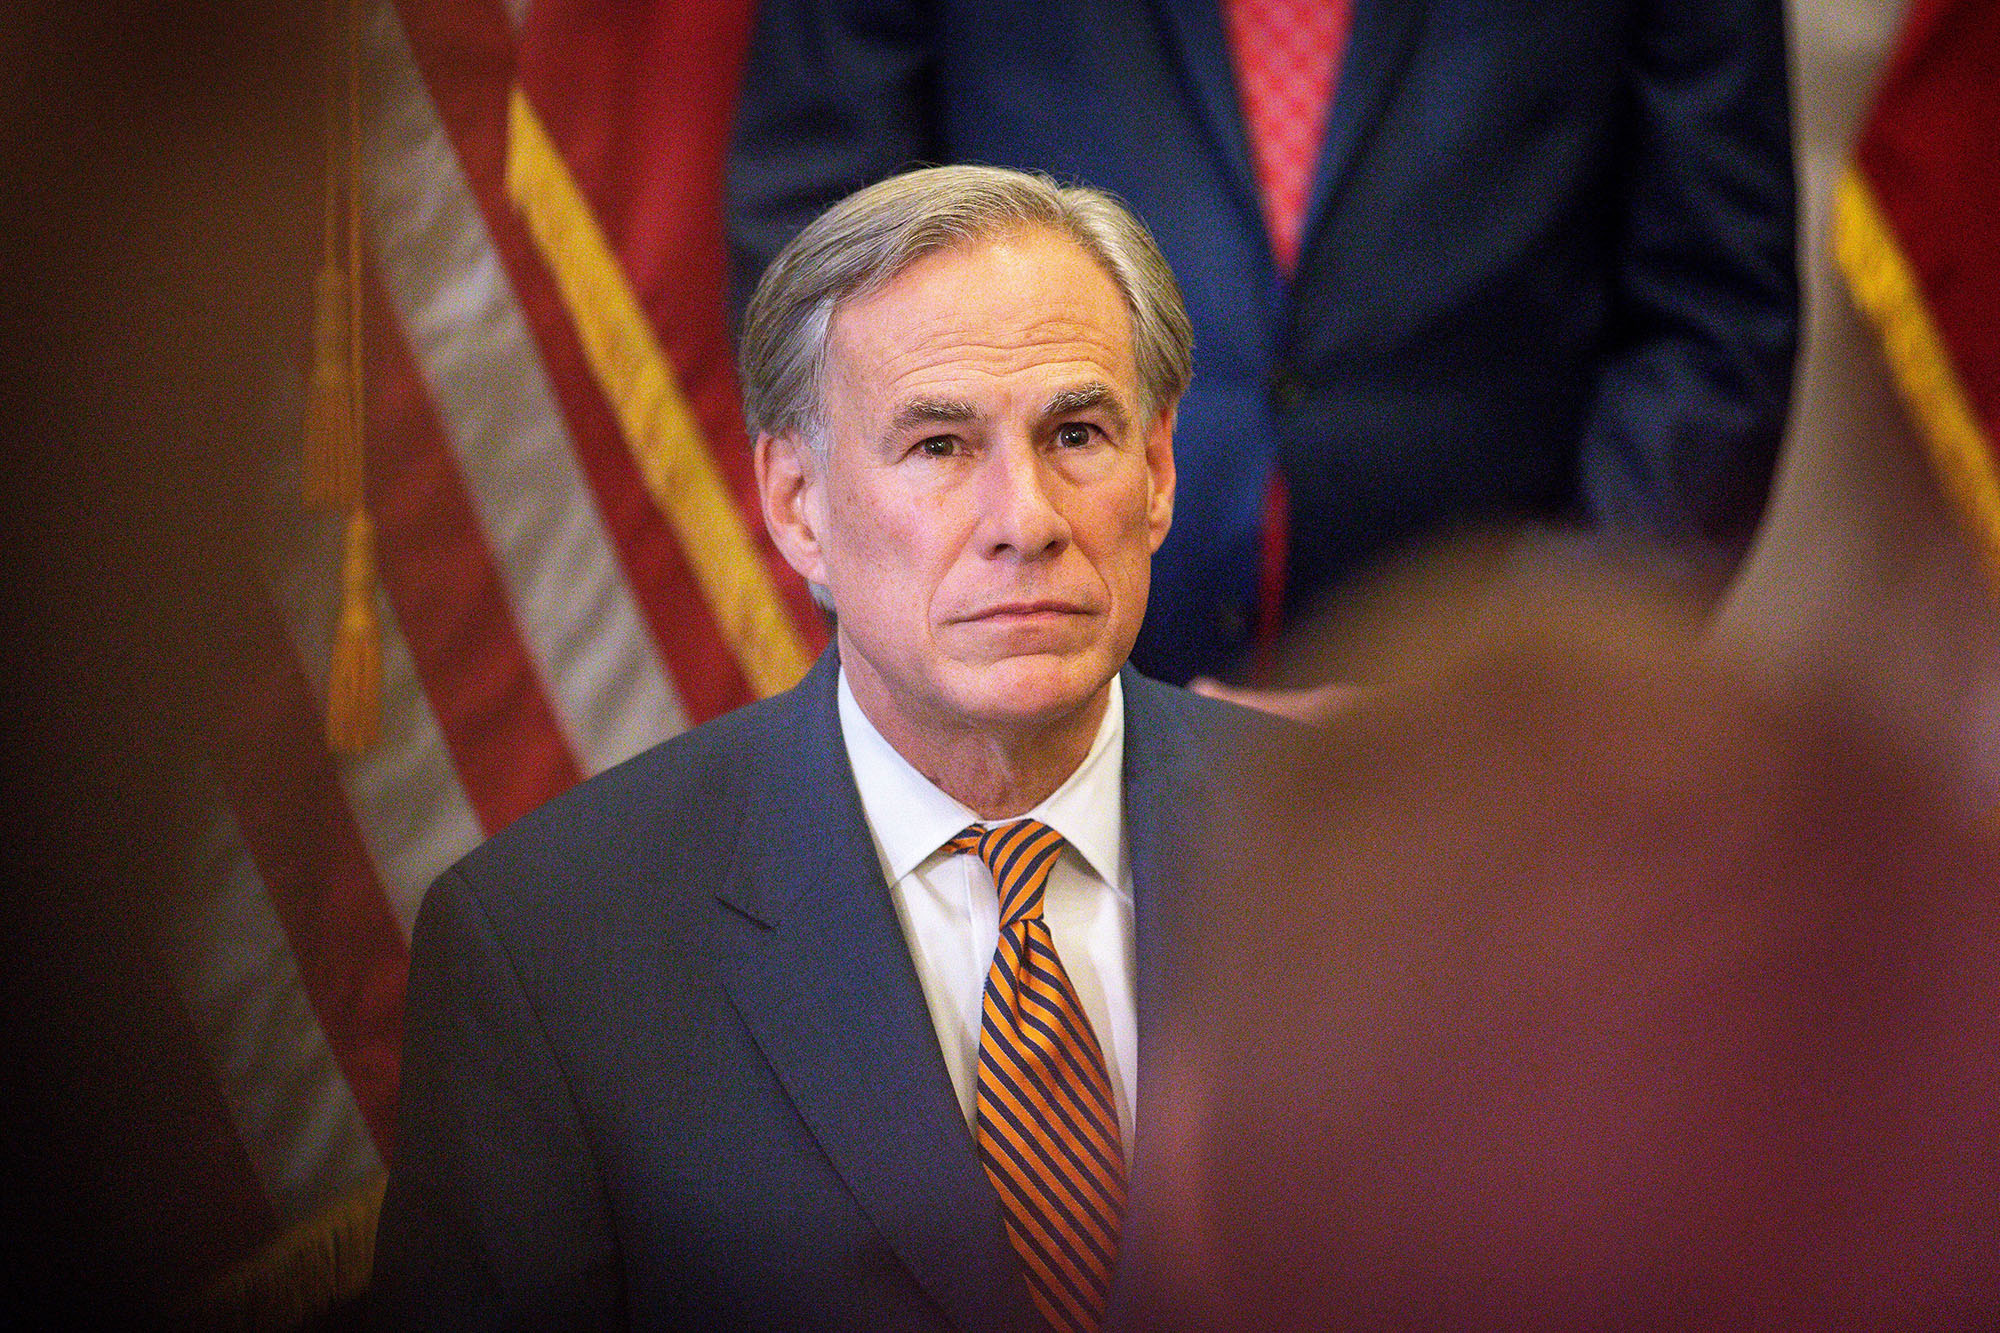 PHOTO: Texas Governor Greg Abbott attends a press conference in Austin, Texas, June 8, 2021.